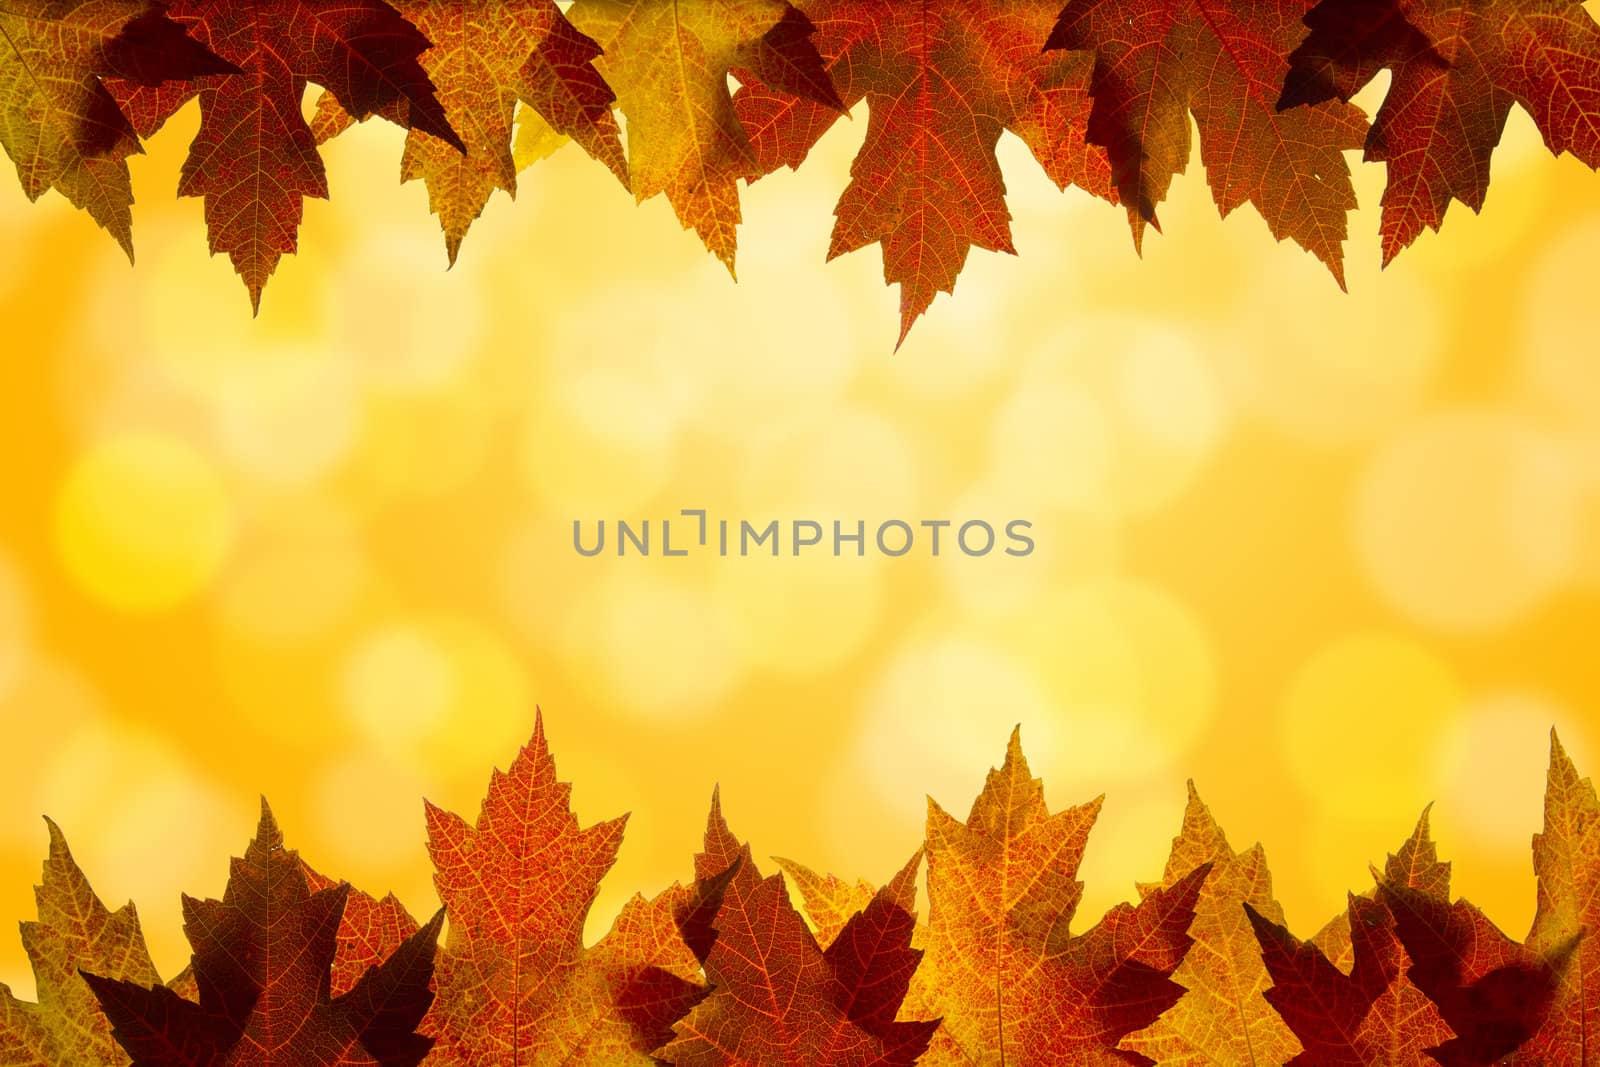 Fall Color Maple Tree Leaves on Blurred Sunlight Background Border Top and Bottom